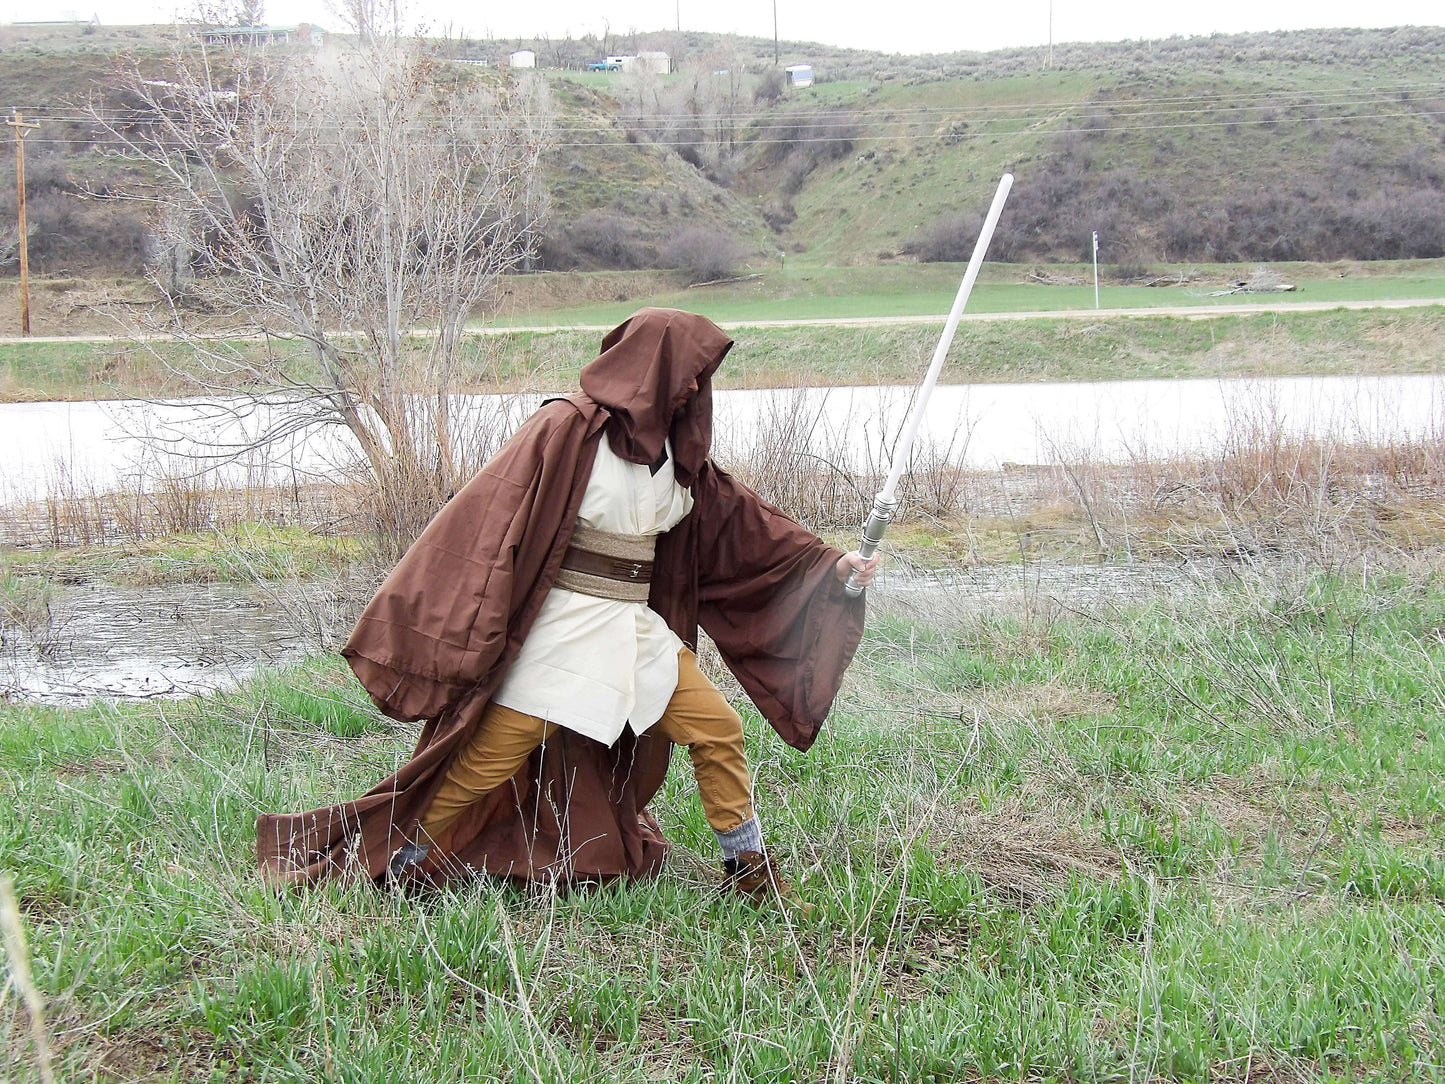 Jedi Cosplay with Full Brown Robe and Under Robes in Light Biege